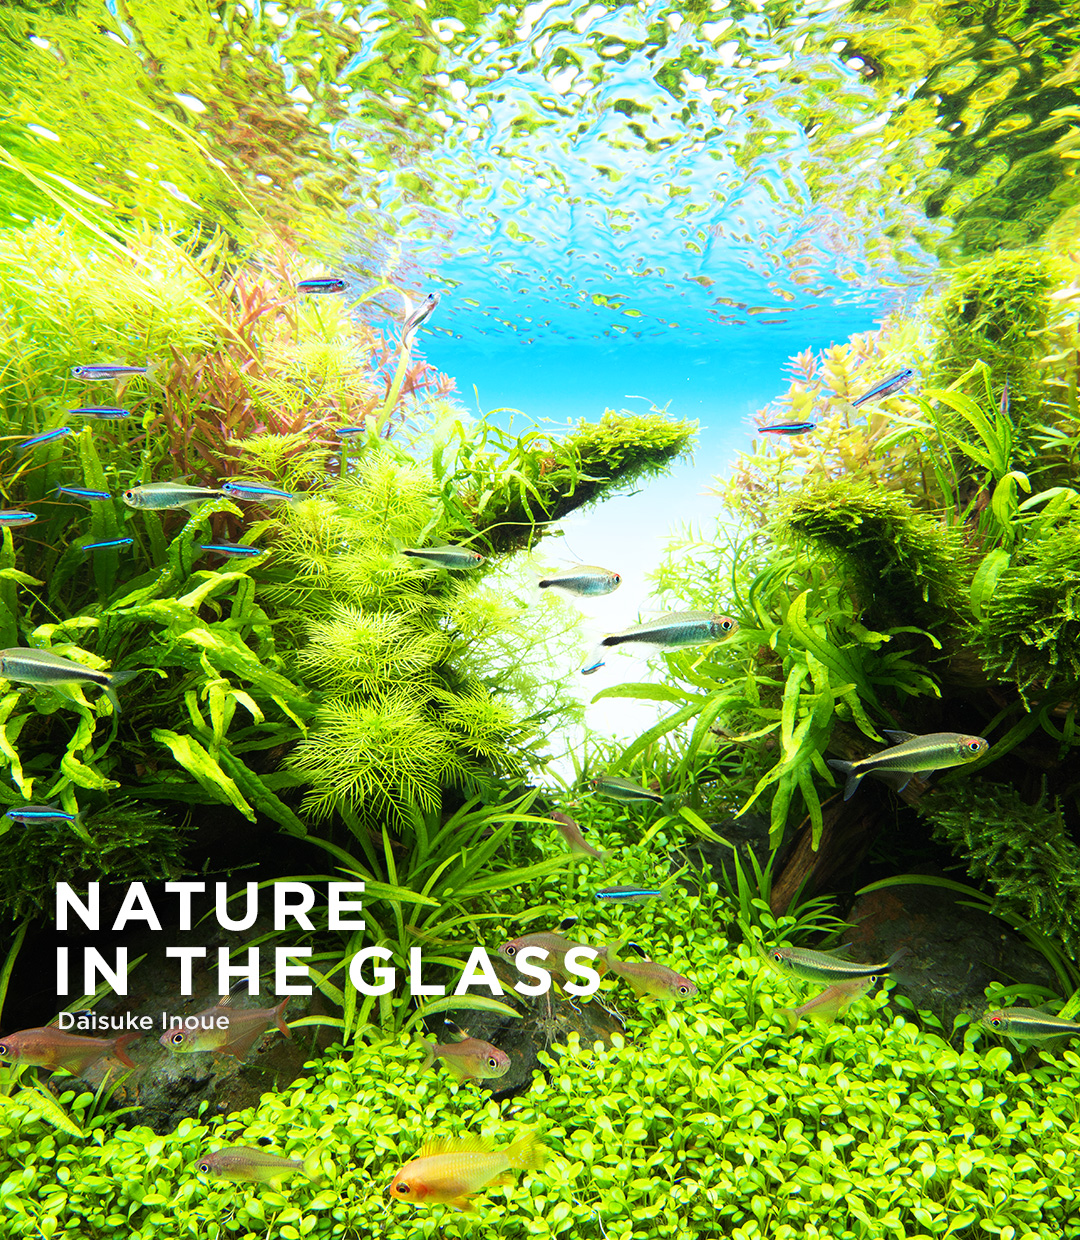 NATURE IN THE GLASS “Light of Worlds”